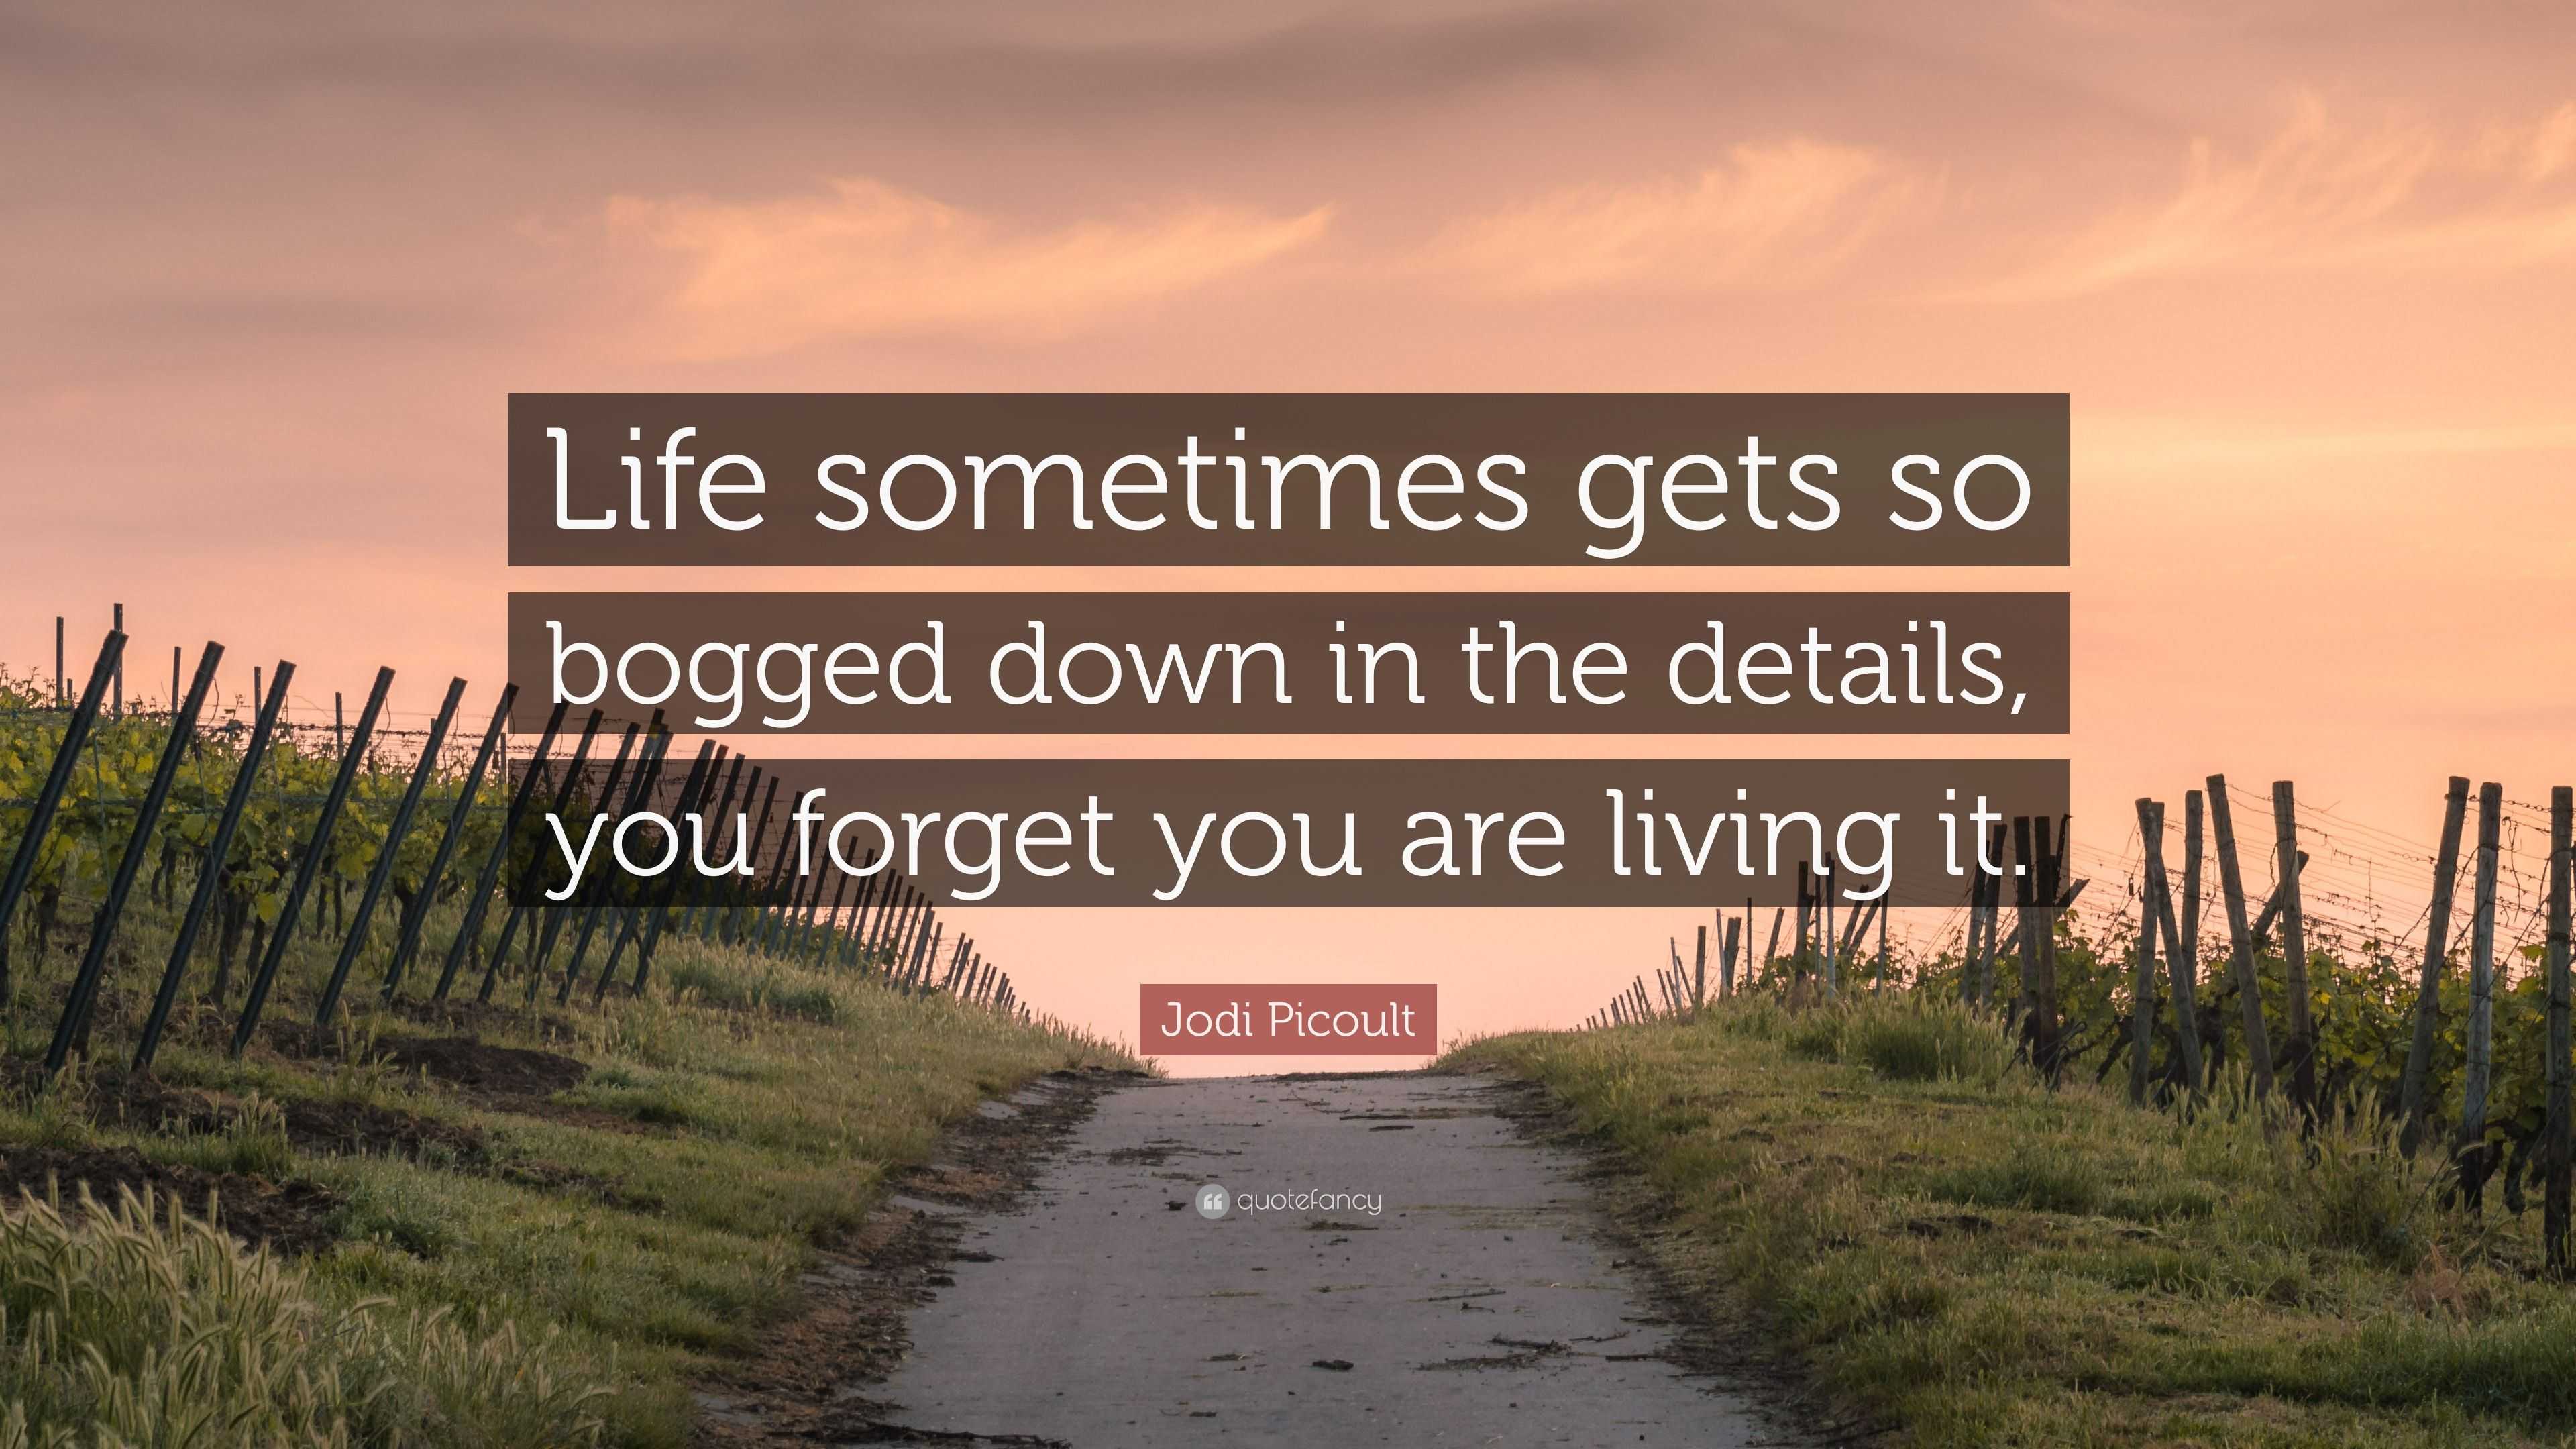 Jodi Picoult Quote: “Life sometimes gets so bogged down in the details ...